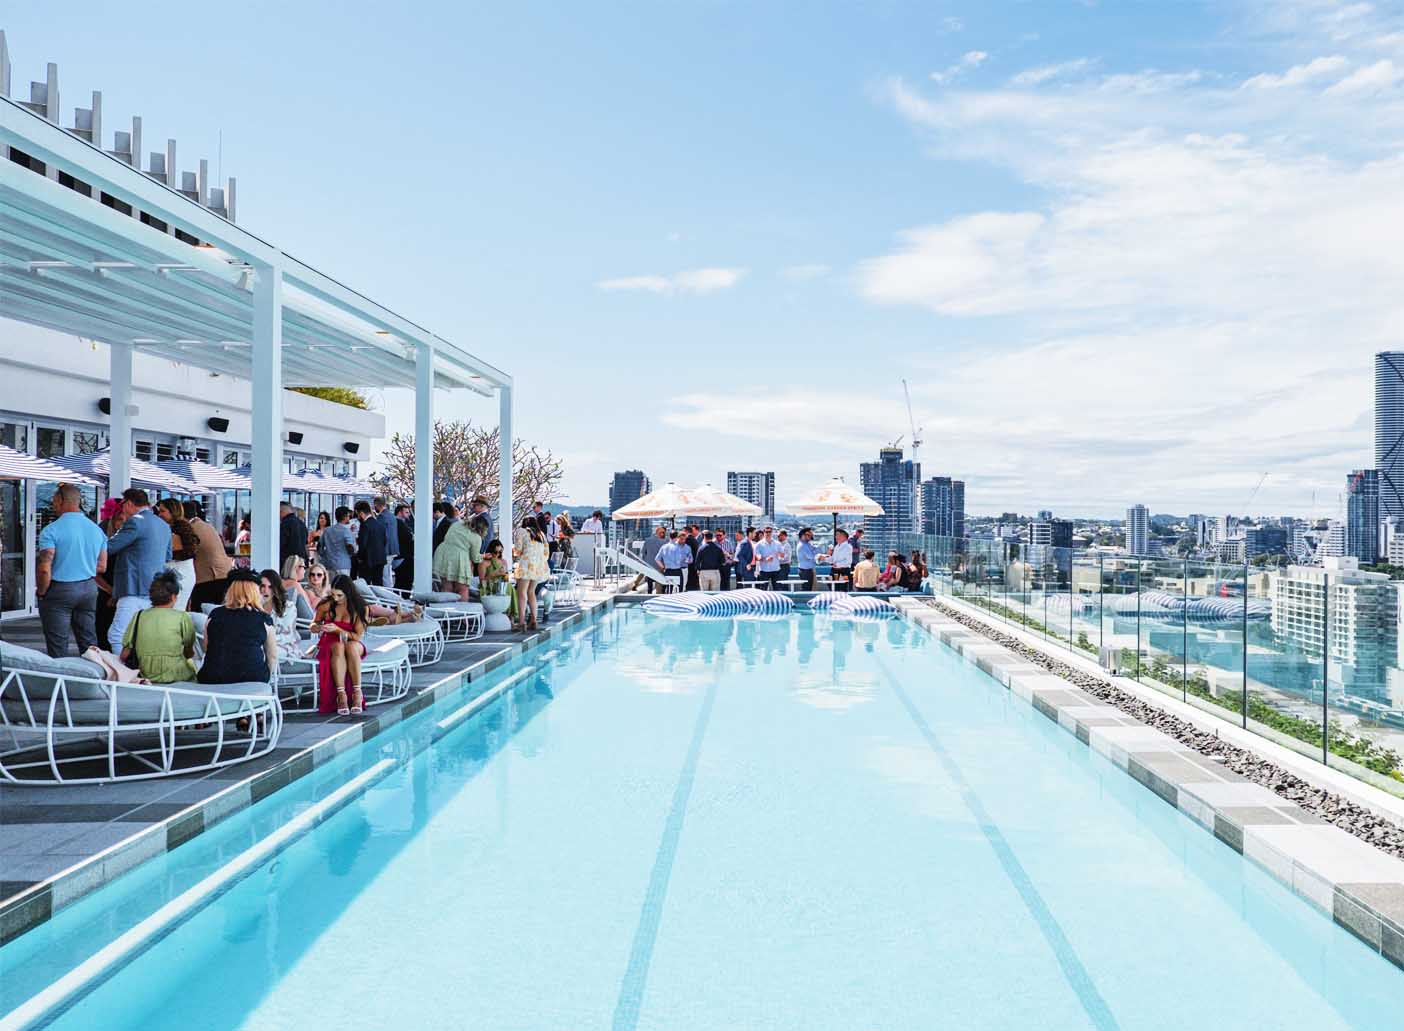 Lina Rooftop <br> Gorgeous Poolside Venues